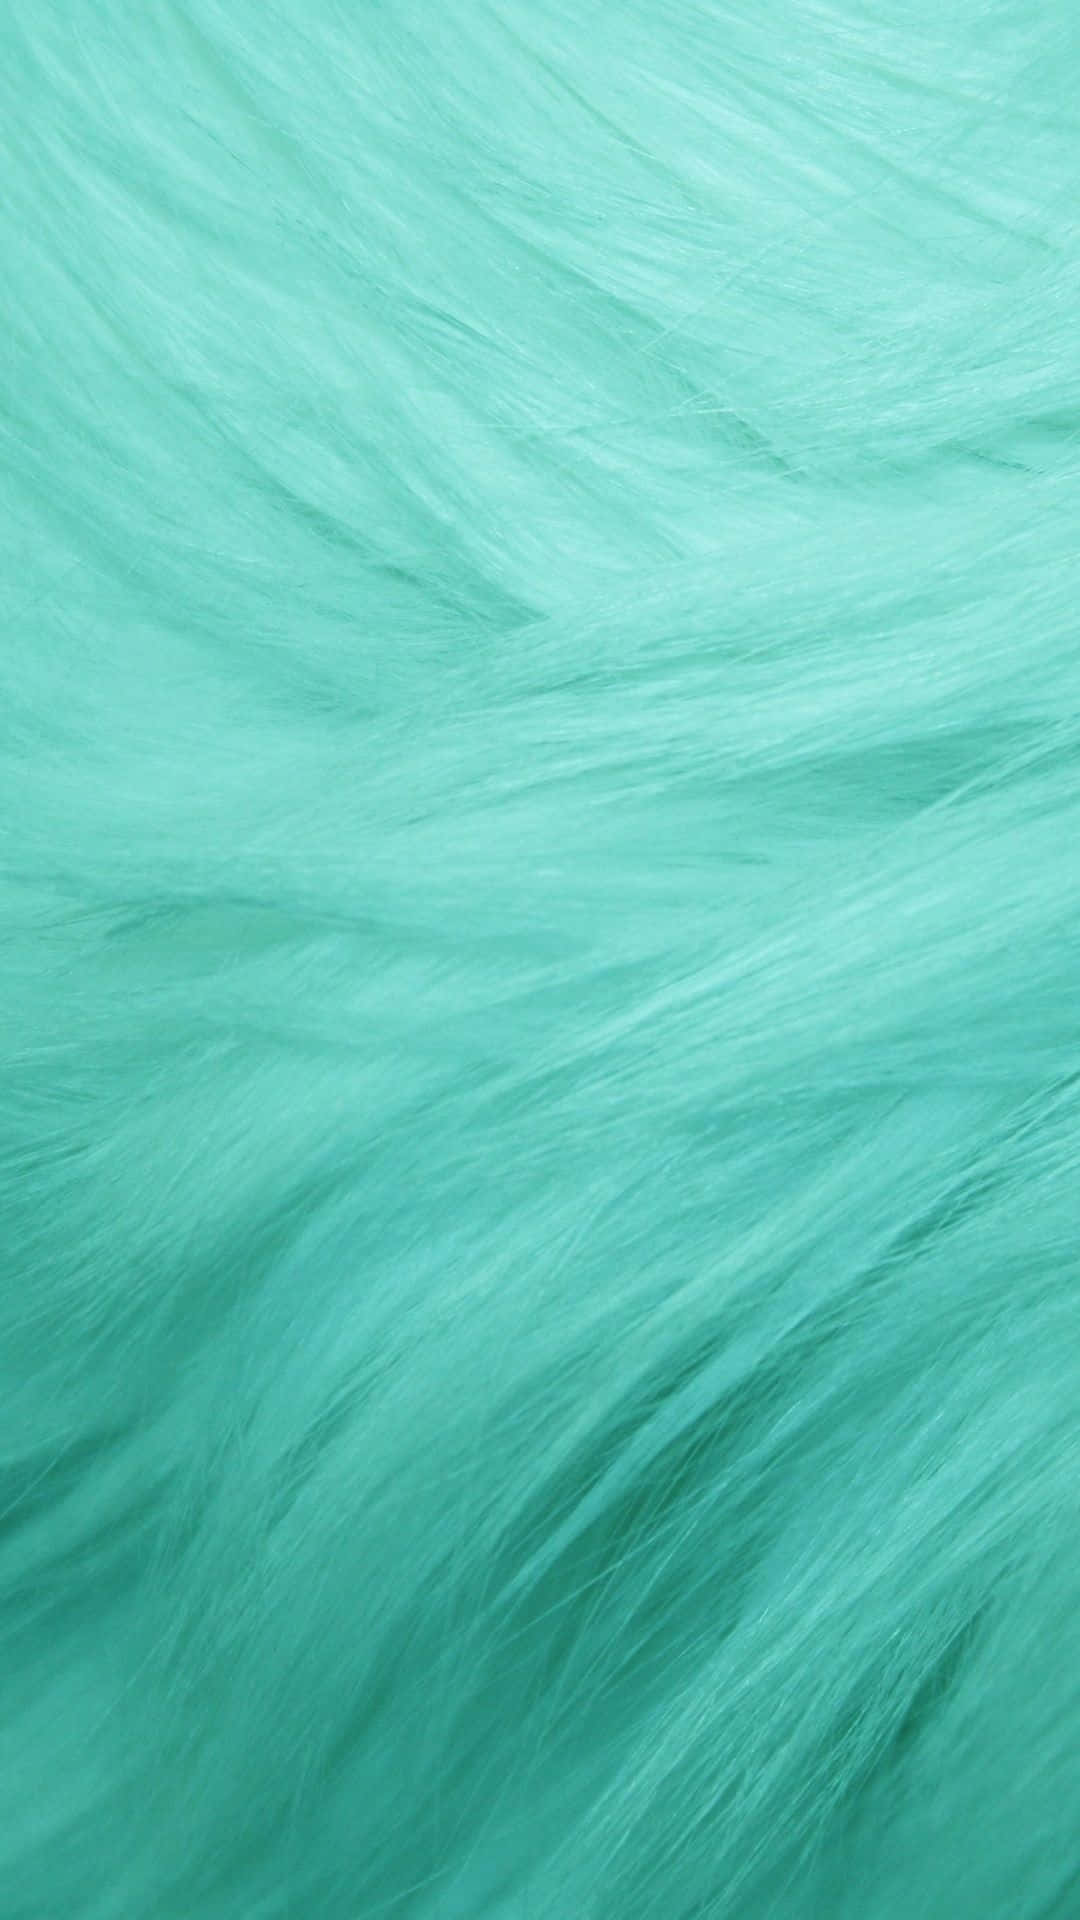 A Close Up Of A Turquoise Fur Wallpaper